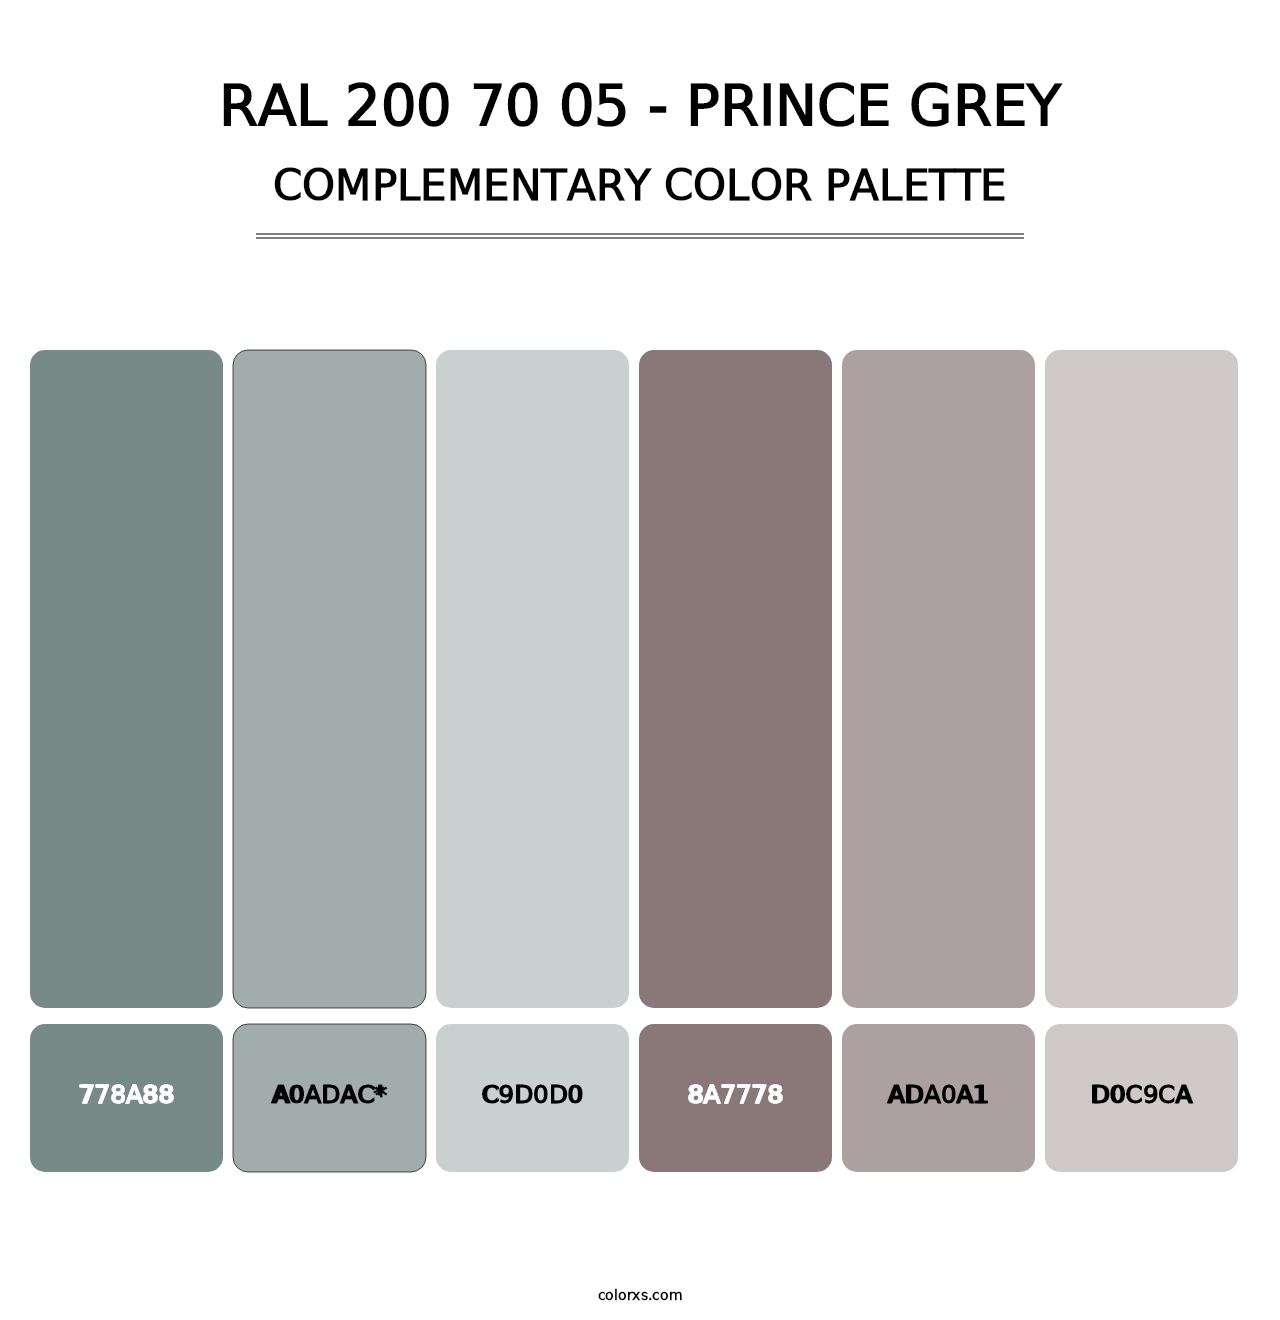 RAL 200 70 05 - Prince Grey - Complementary Color Palette